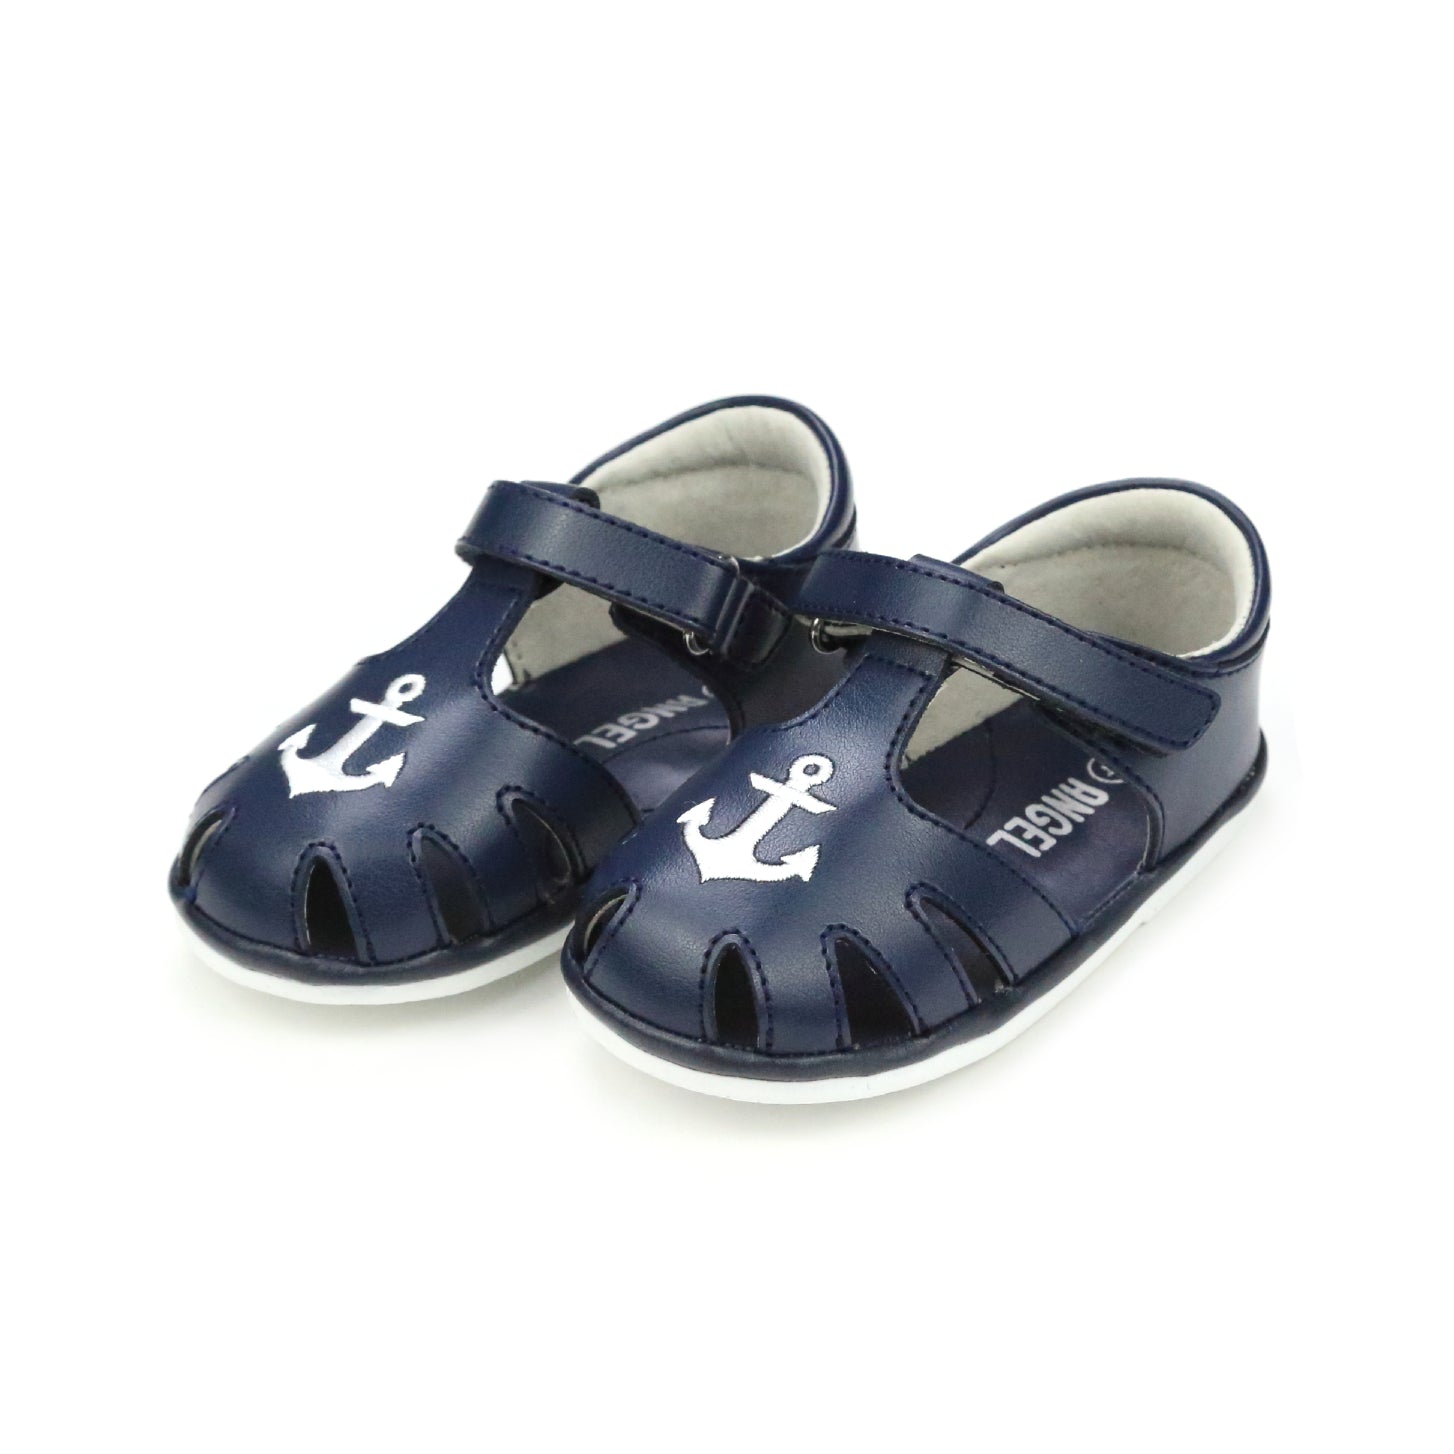 Sawyer Nautical Caged Leather Sandal - Babies & Toddlers